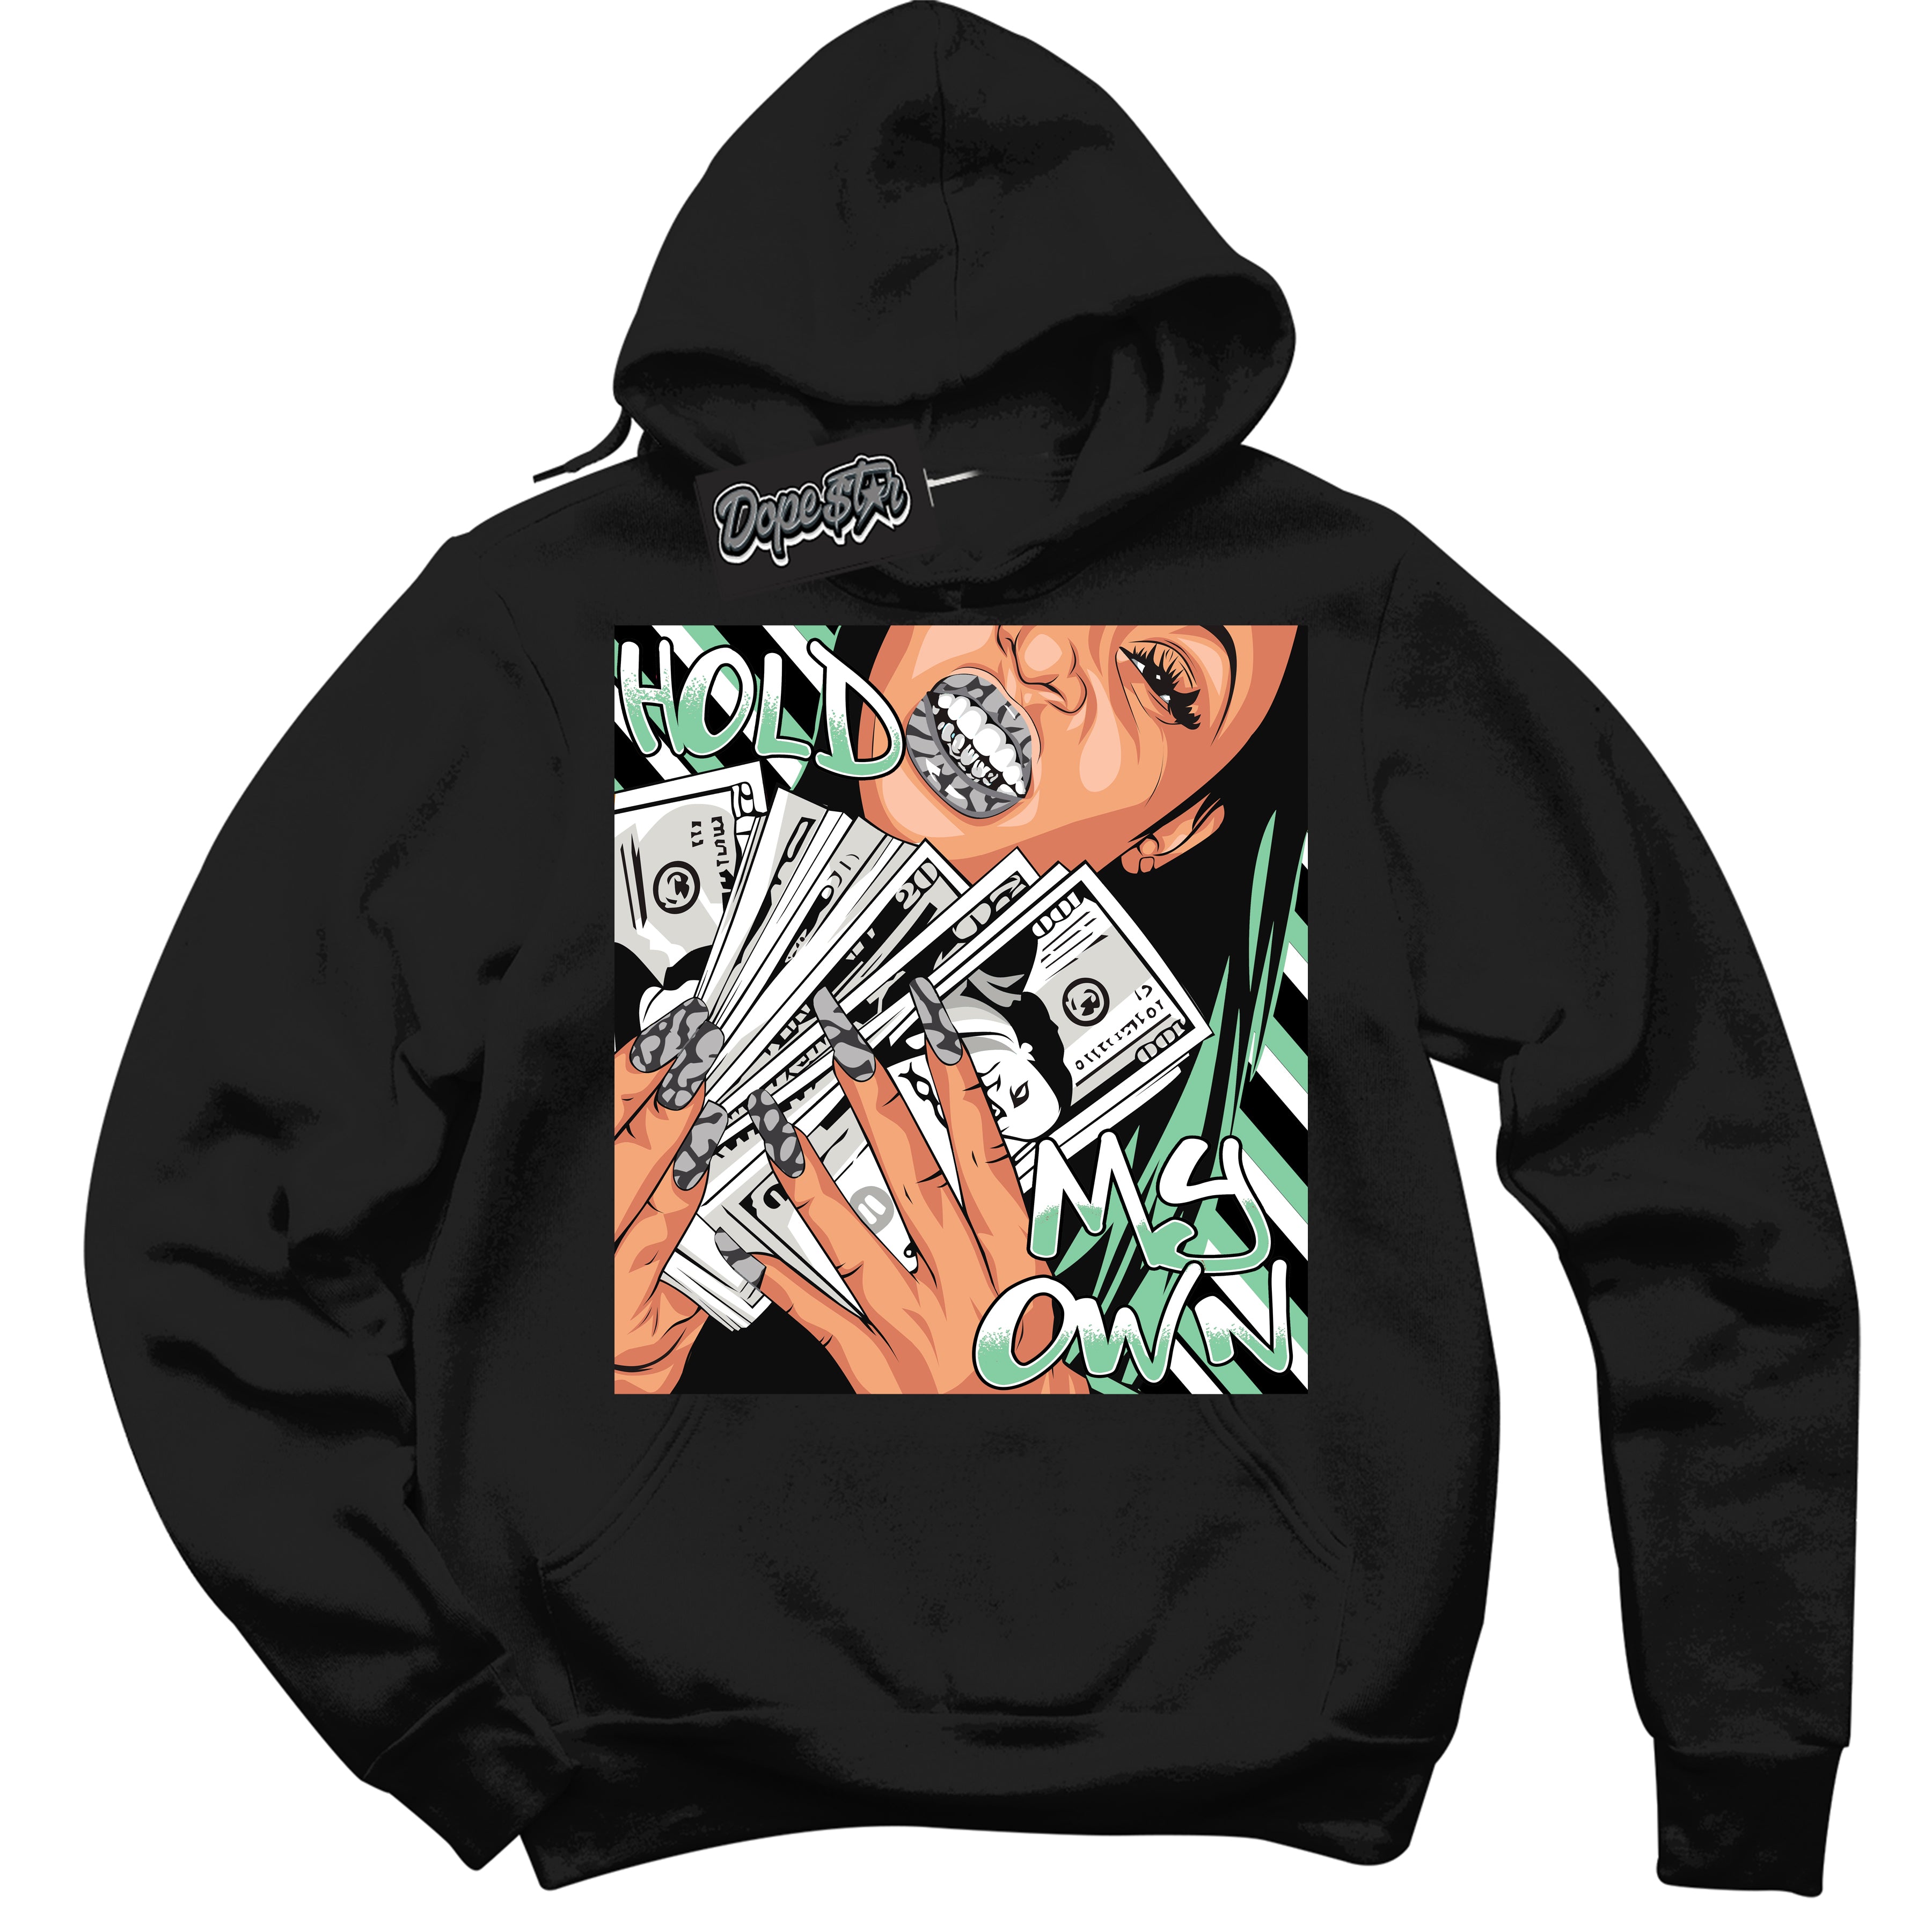 Cool Black Graphic DopeStar Hoodie with “ Hold My Own “ print, that perfectly matches Green Glow 3S sneakers